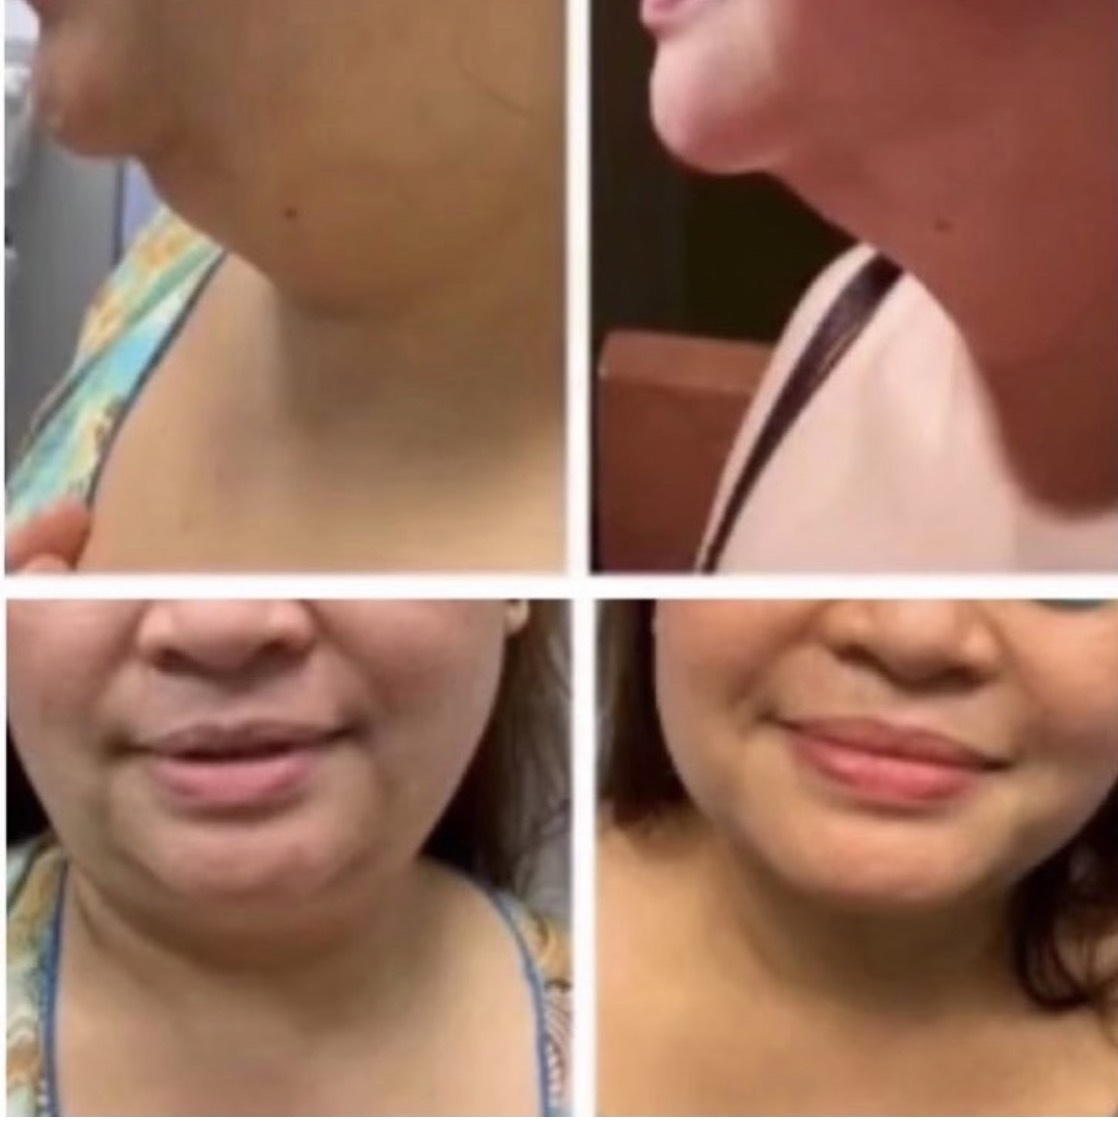 Agnes (Radiofrequency plus Microneedling) treatment for under chin and jowl fat reduction